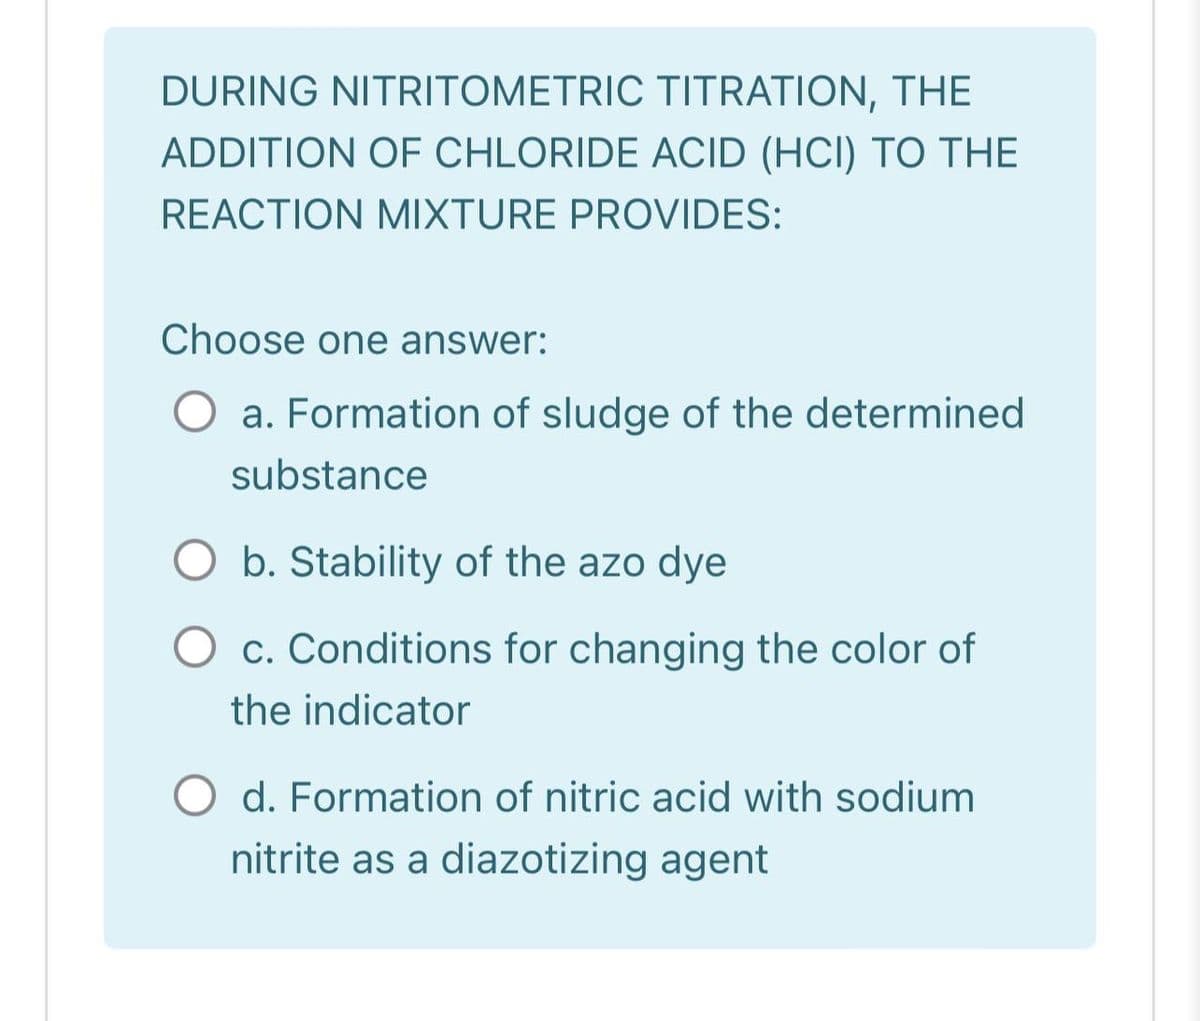 DURING NITRITOMETRIC TITRATION, THE
ADDITION OF CHLORIDE ACID (HCI) TO THE
REACTION MIXTURE PROVIDES:
Choose one answer:
O a. Formation of sludge of the determined
substance
b. Stability of the azo dye
O c. Conditions for changing the color of
the indicator
O d. Formation of nitric acid with sodium
nitrite as a diazotizing agent
